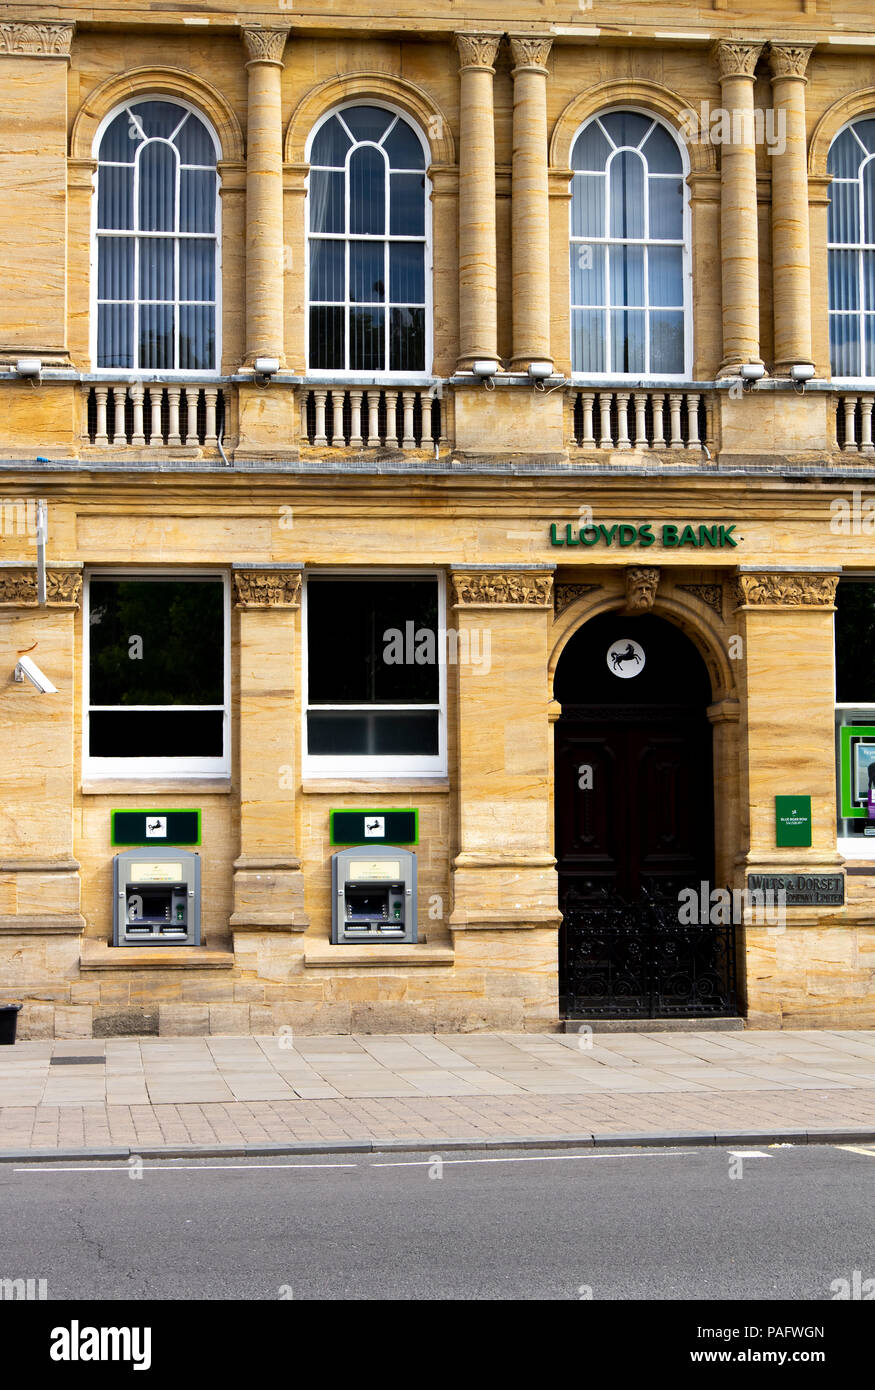 Lloyds local bank branch building, British retail and commercial bank, originally founded in 1765 Stock Photo